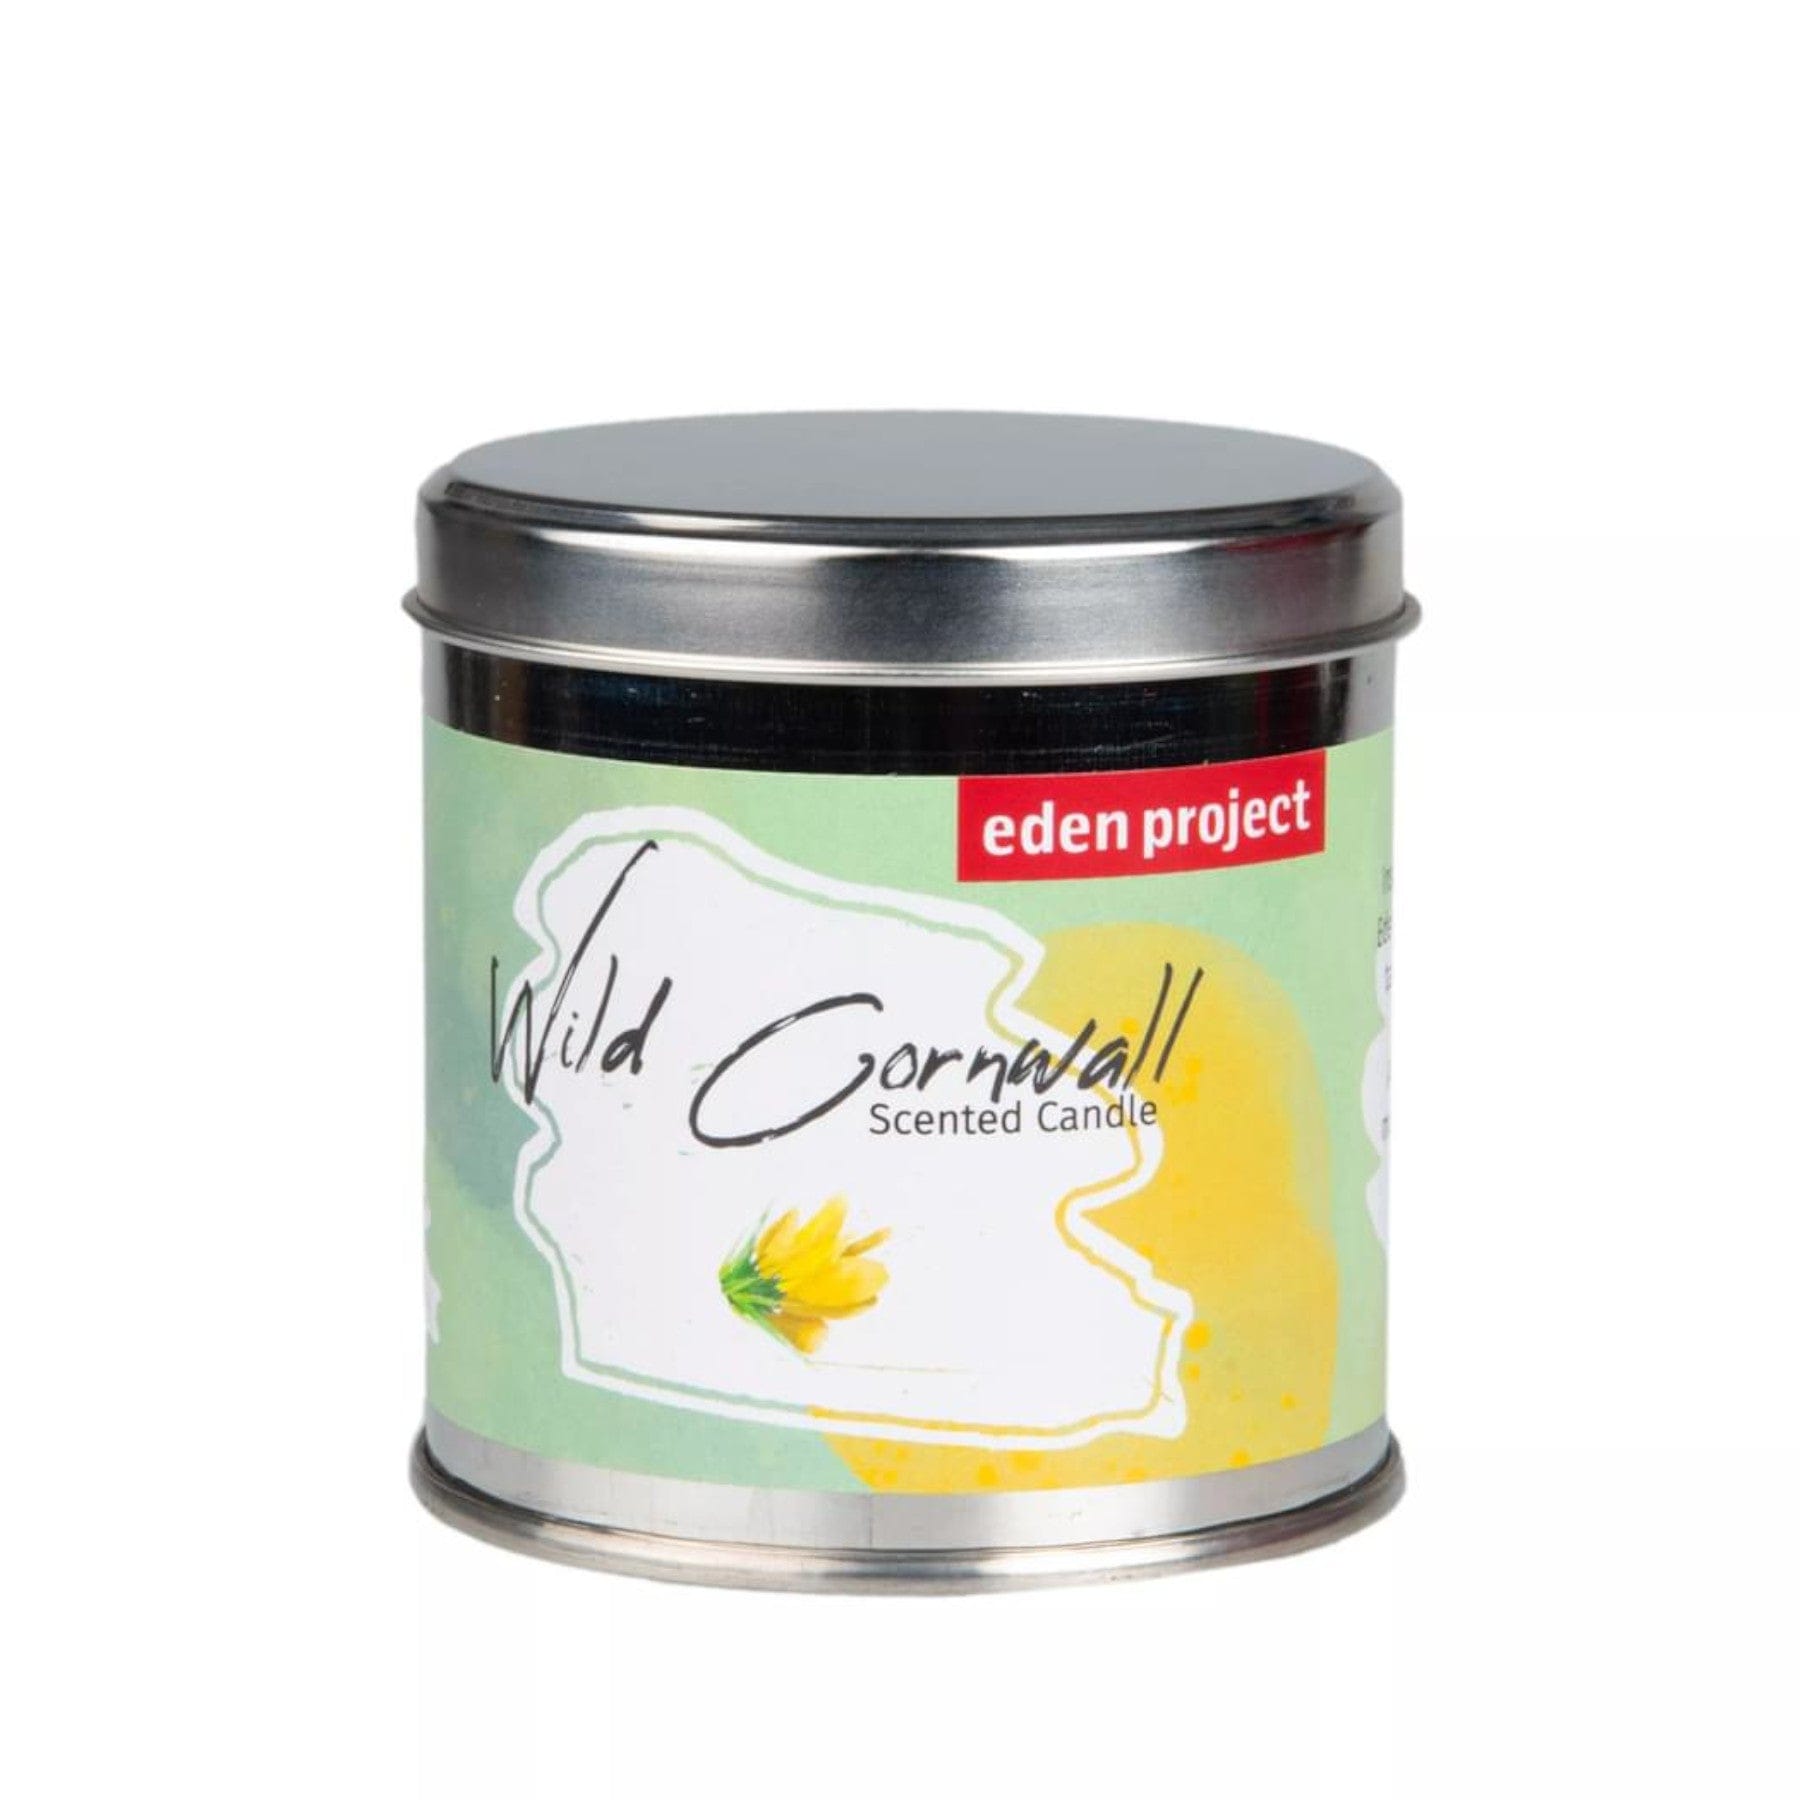 Eden Project Wild Cornwall scented candle in tin container with floral design on label.